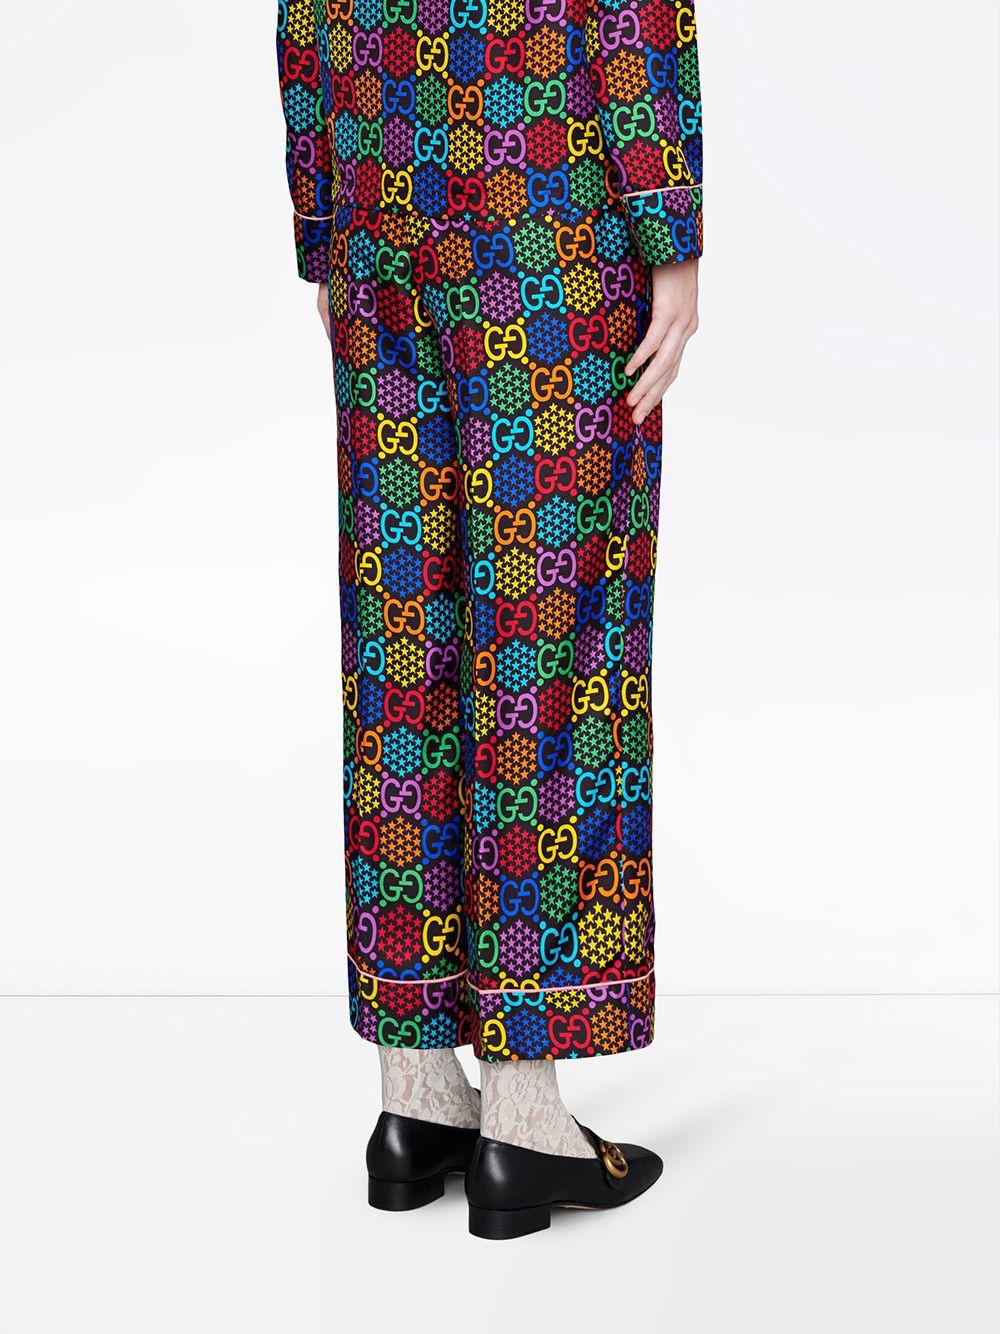 Gucci GG Psychedelic Print Pyjama Trousers in Black